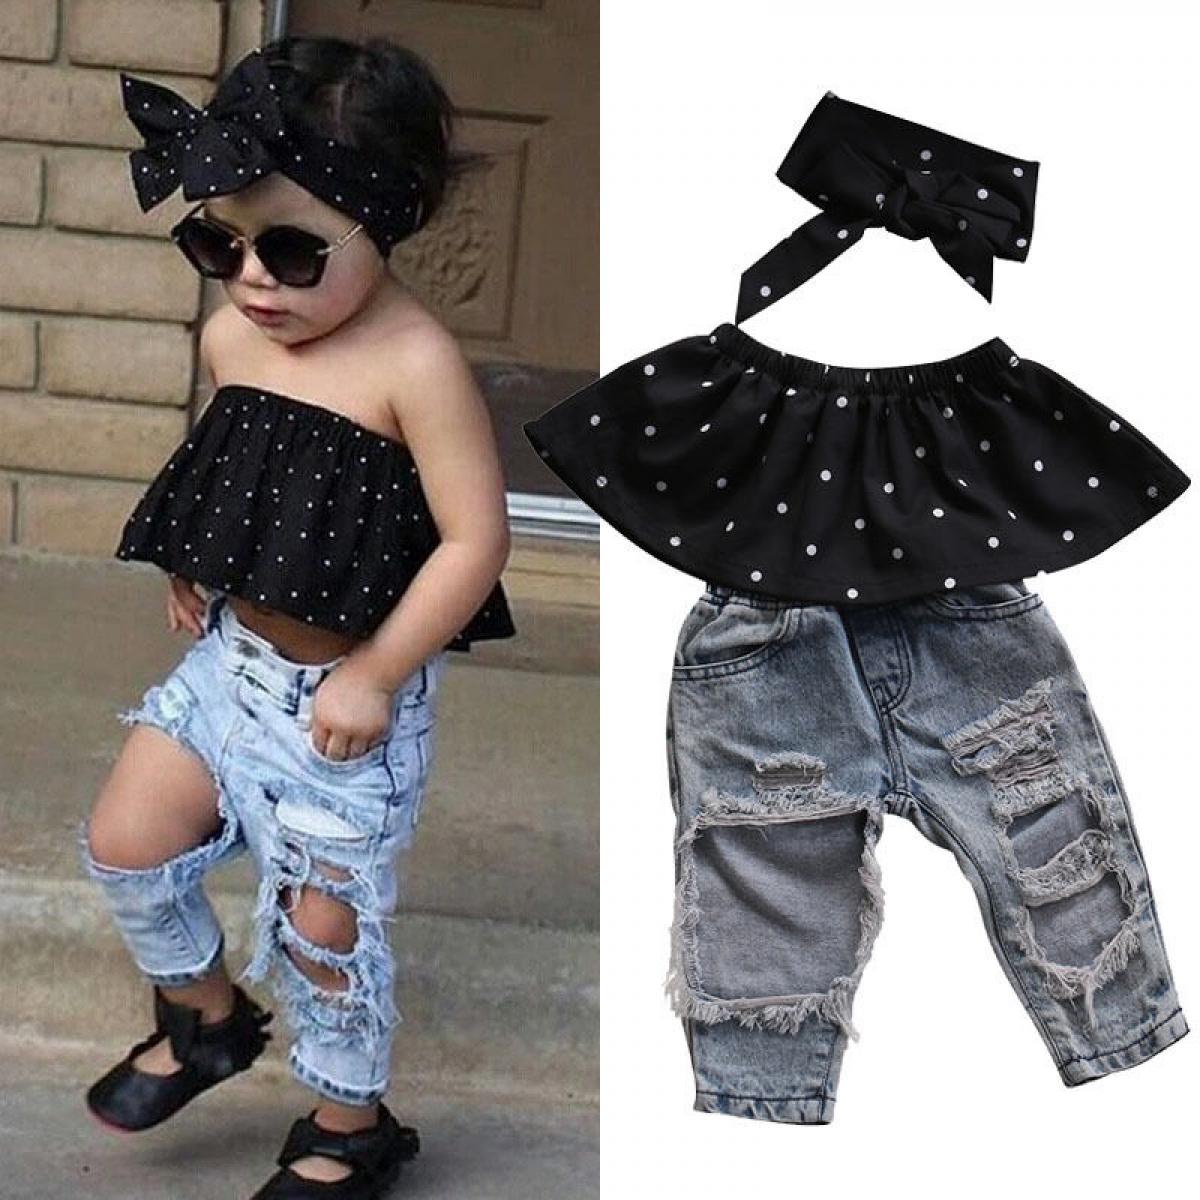 https://d3thqe68ymbqps.cloudfront.net/3497127-large_default/sunsiom-toddler-baby-girl-clothes-sets-dot-sleeveless-tops-vest-hole-j.jpg